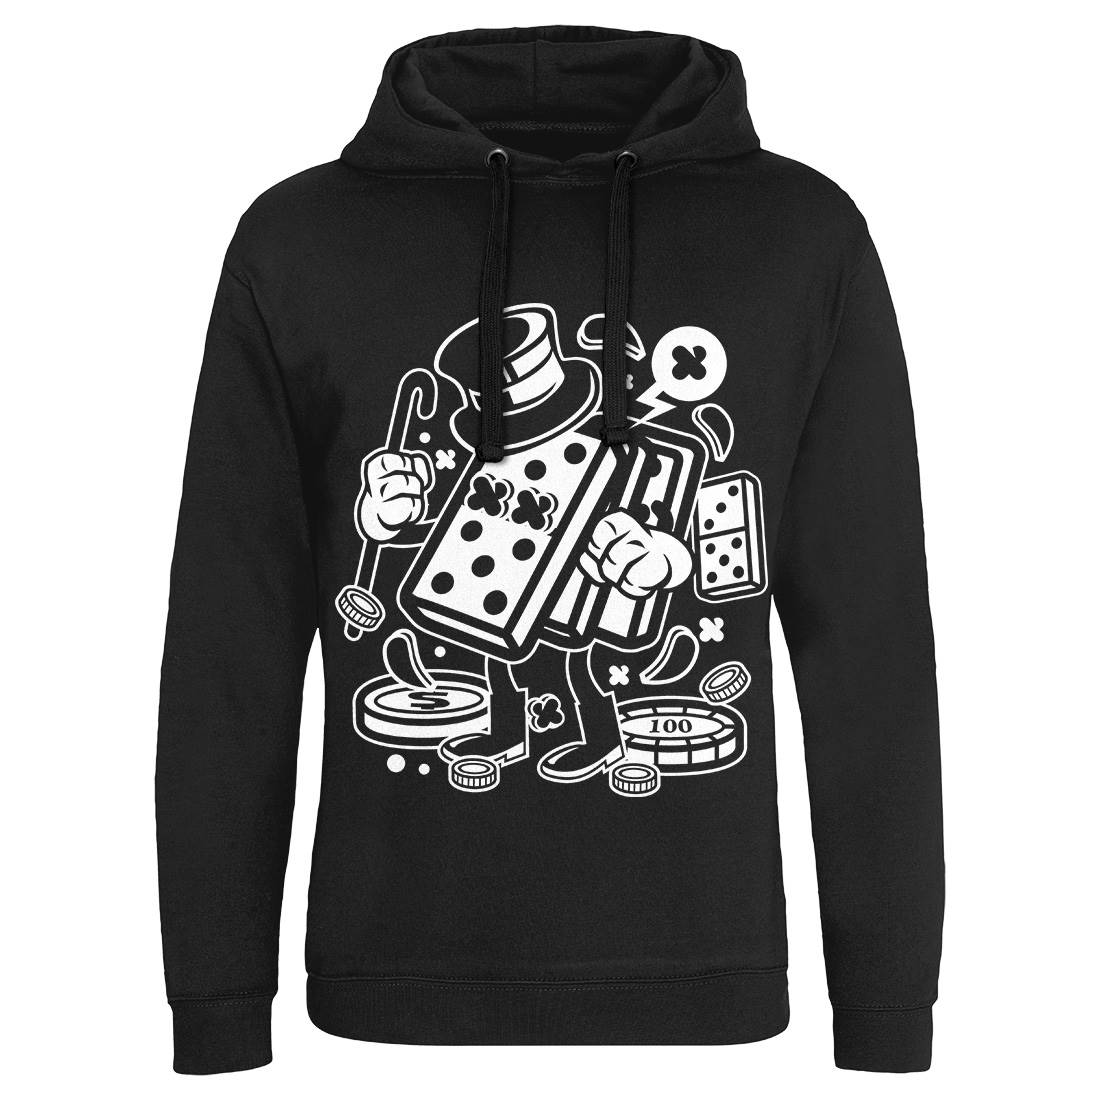 Classic Gambler Mens Hoodie Without Pocket Retro C070